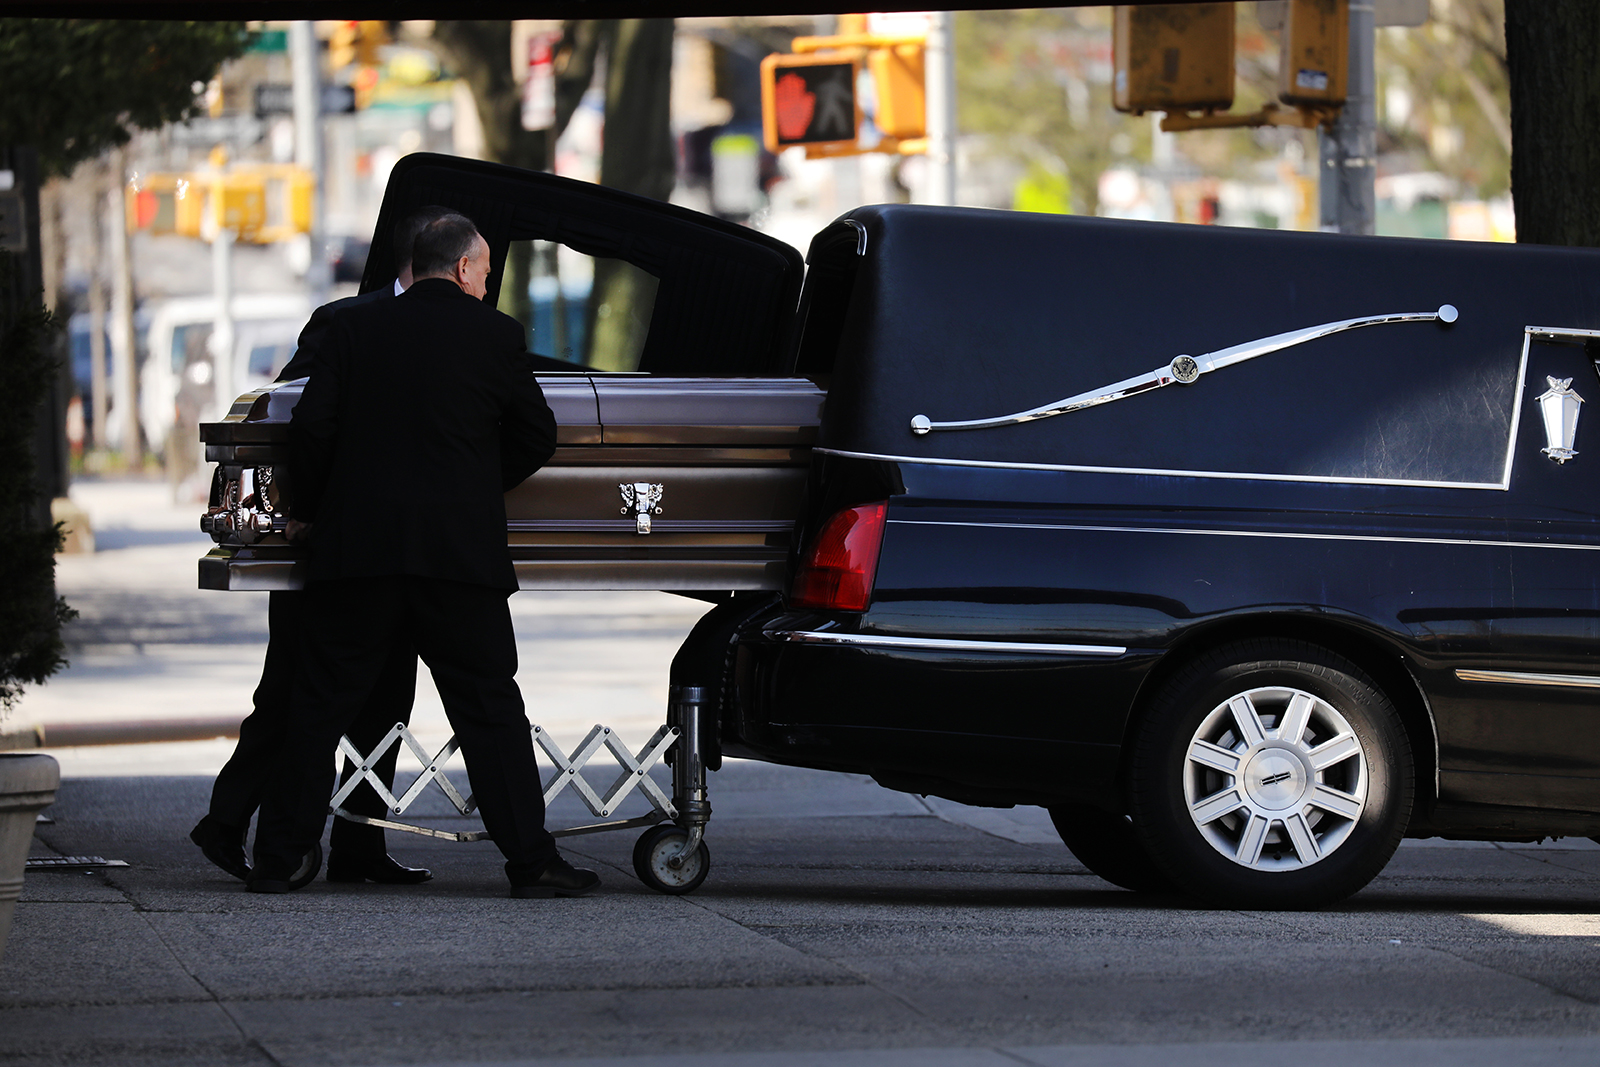 A casket is placed into a hearse outside of a funeral home in New York City on April 16.